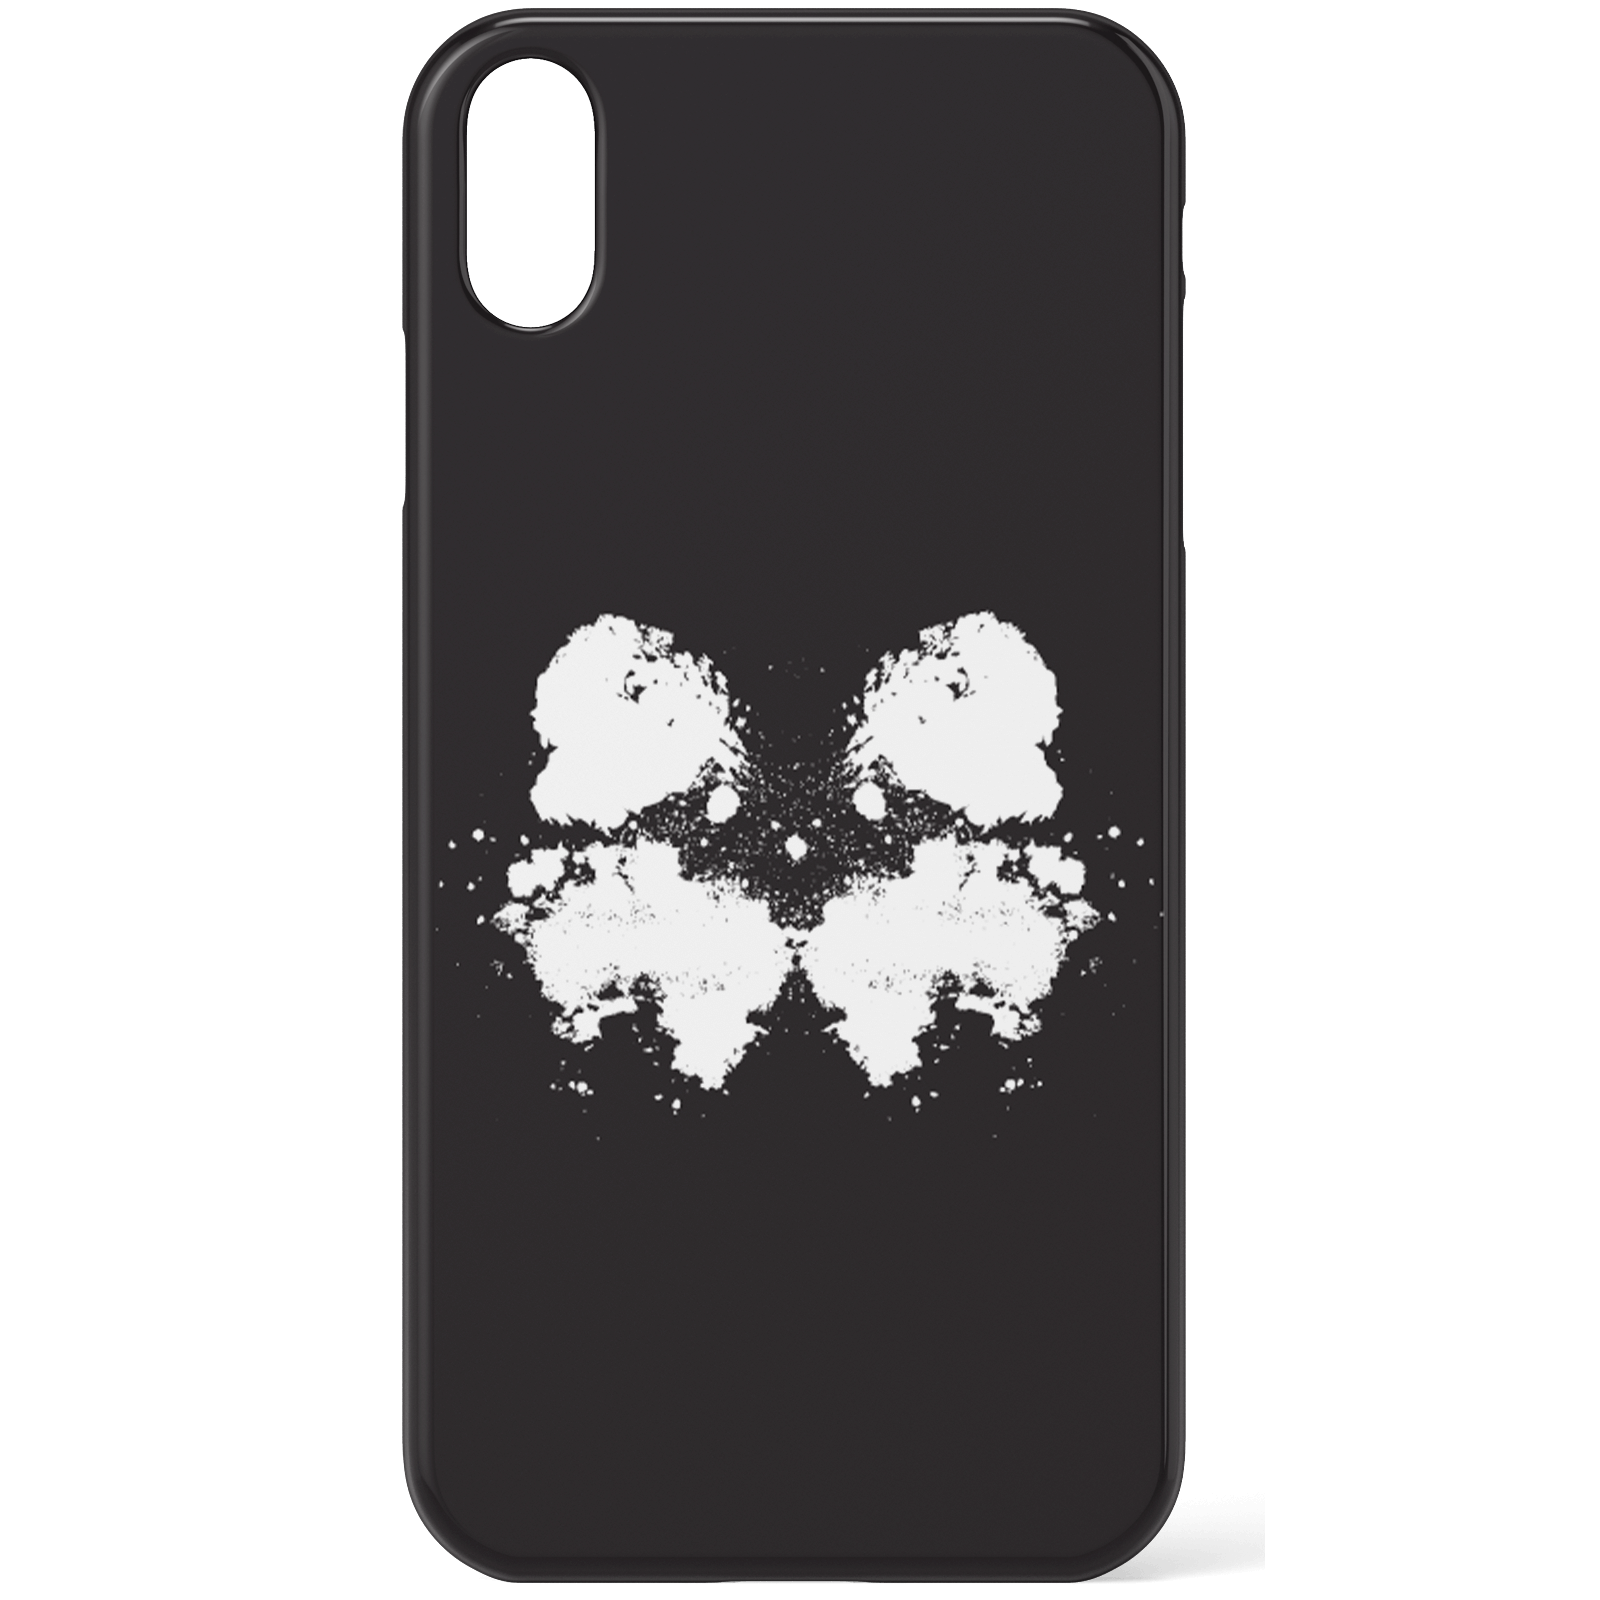 Rorschach Inkblot Black Phone Case for iPhone and Android - iPhone 5/5s - Snap Case - Matte